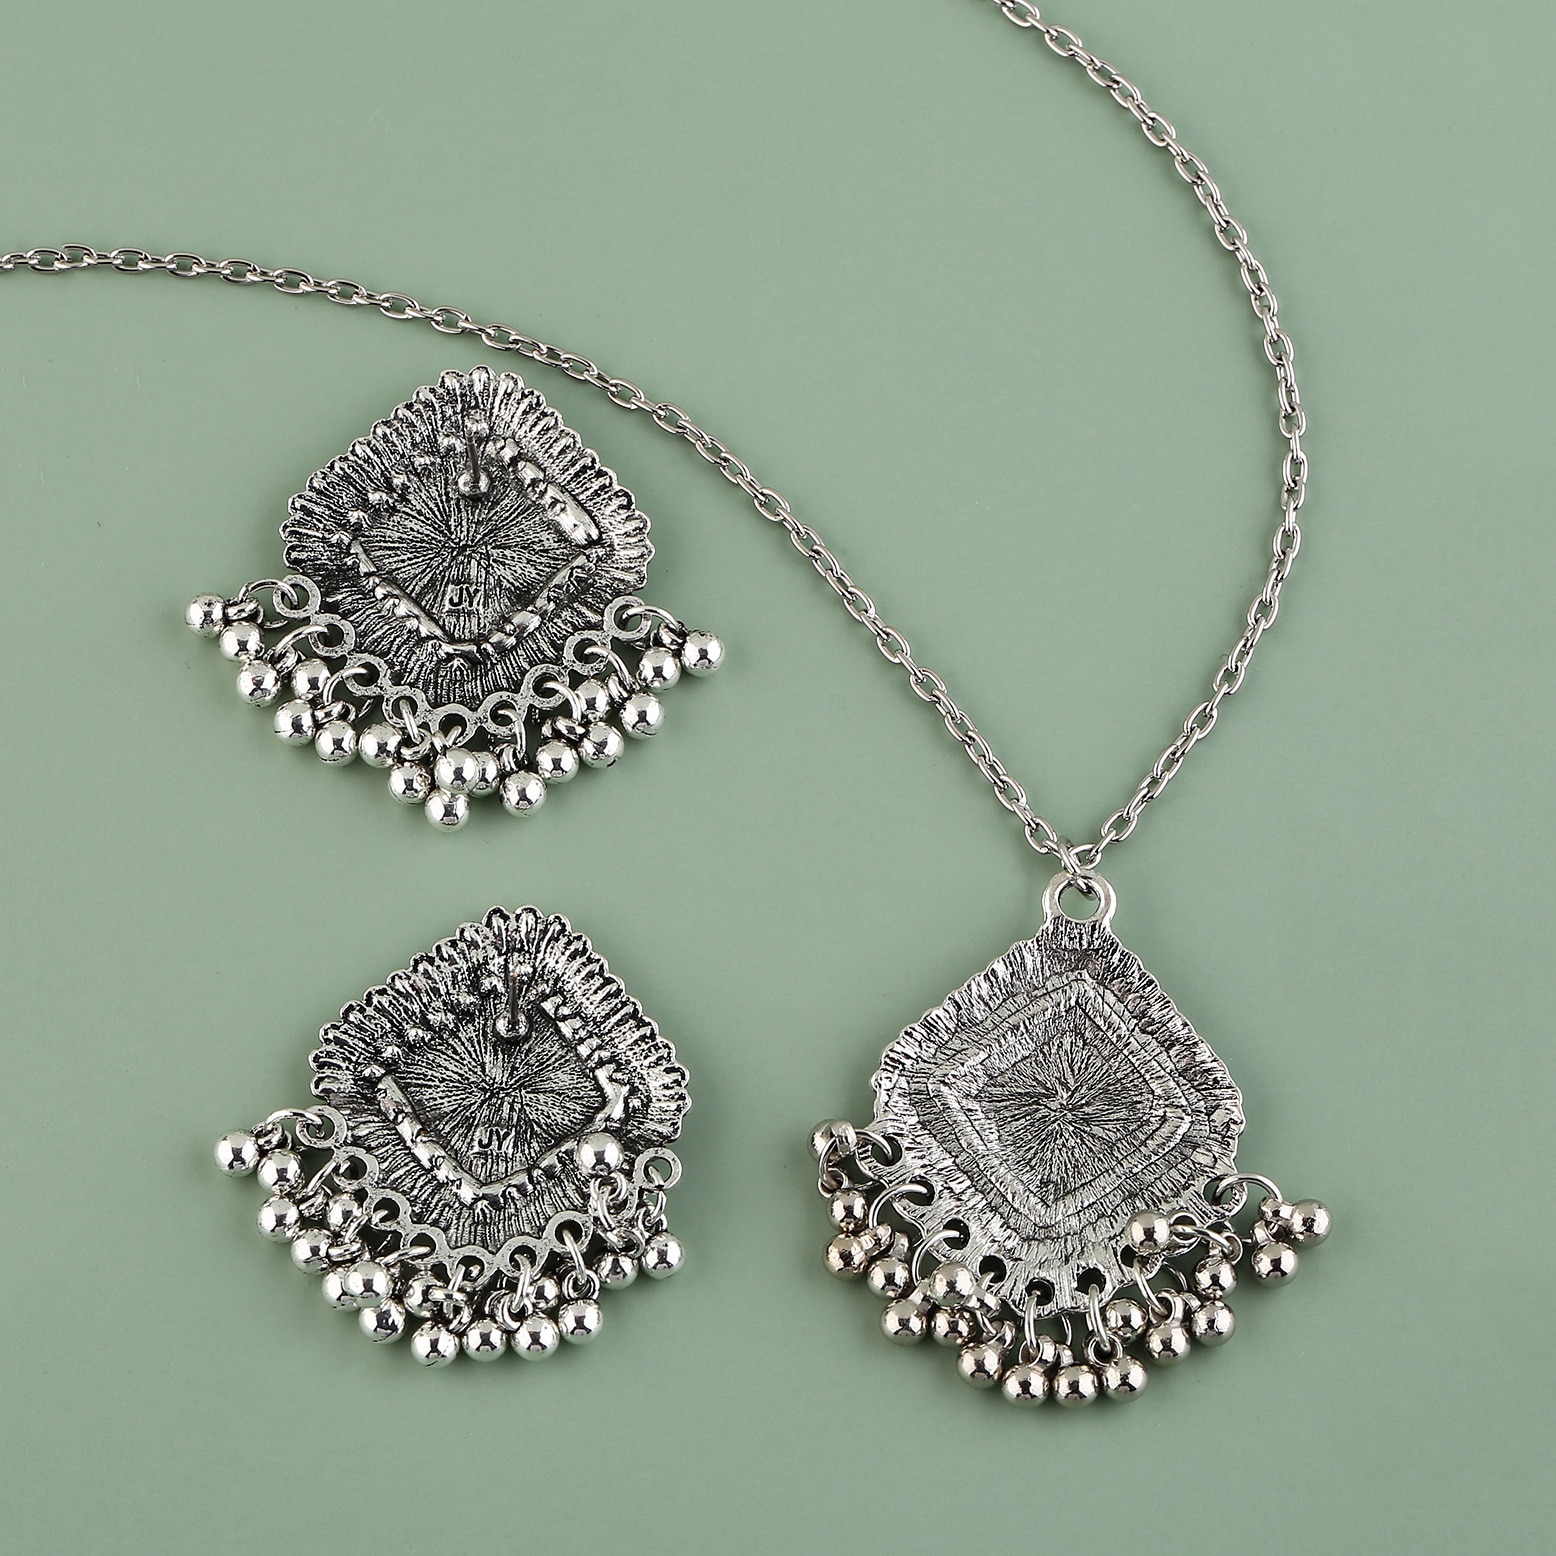 Vintage-Silver-Color-Flower-Jewelry-Sets-For-Women-Bell-Tassel-Necklaces-Earring-Bridal-Afghan-India-3256804350137978-5